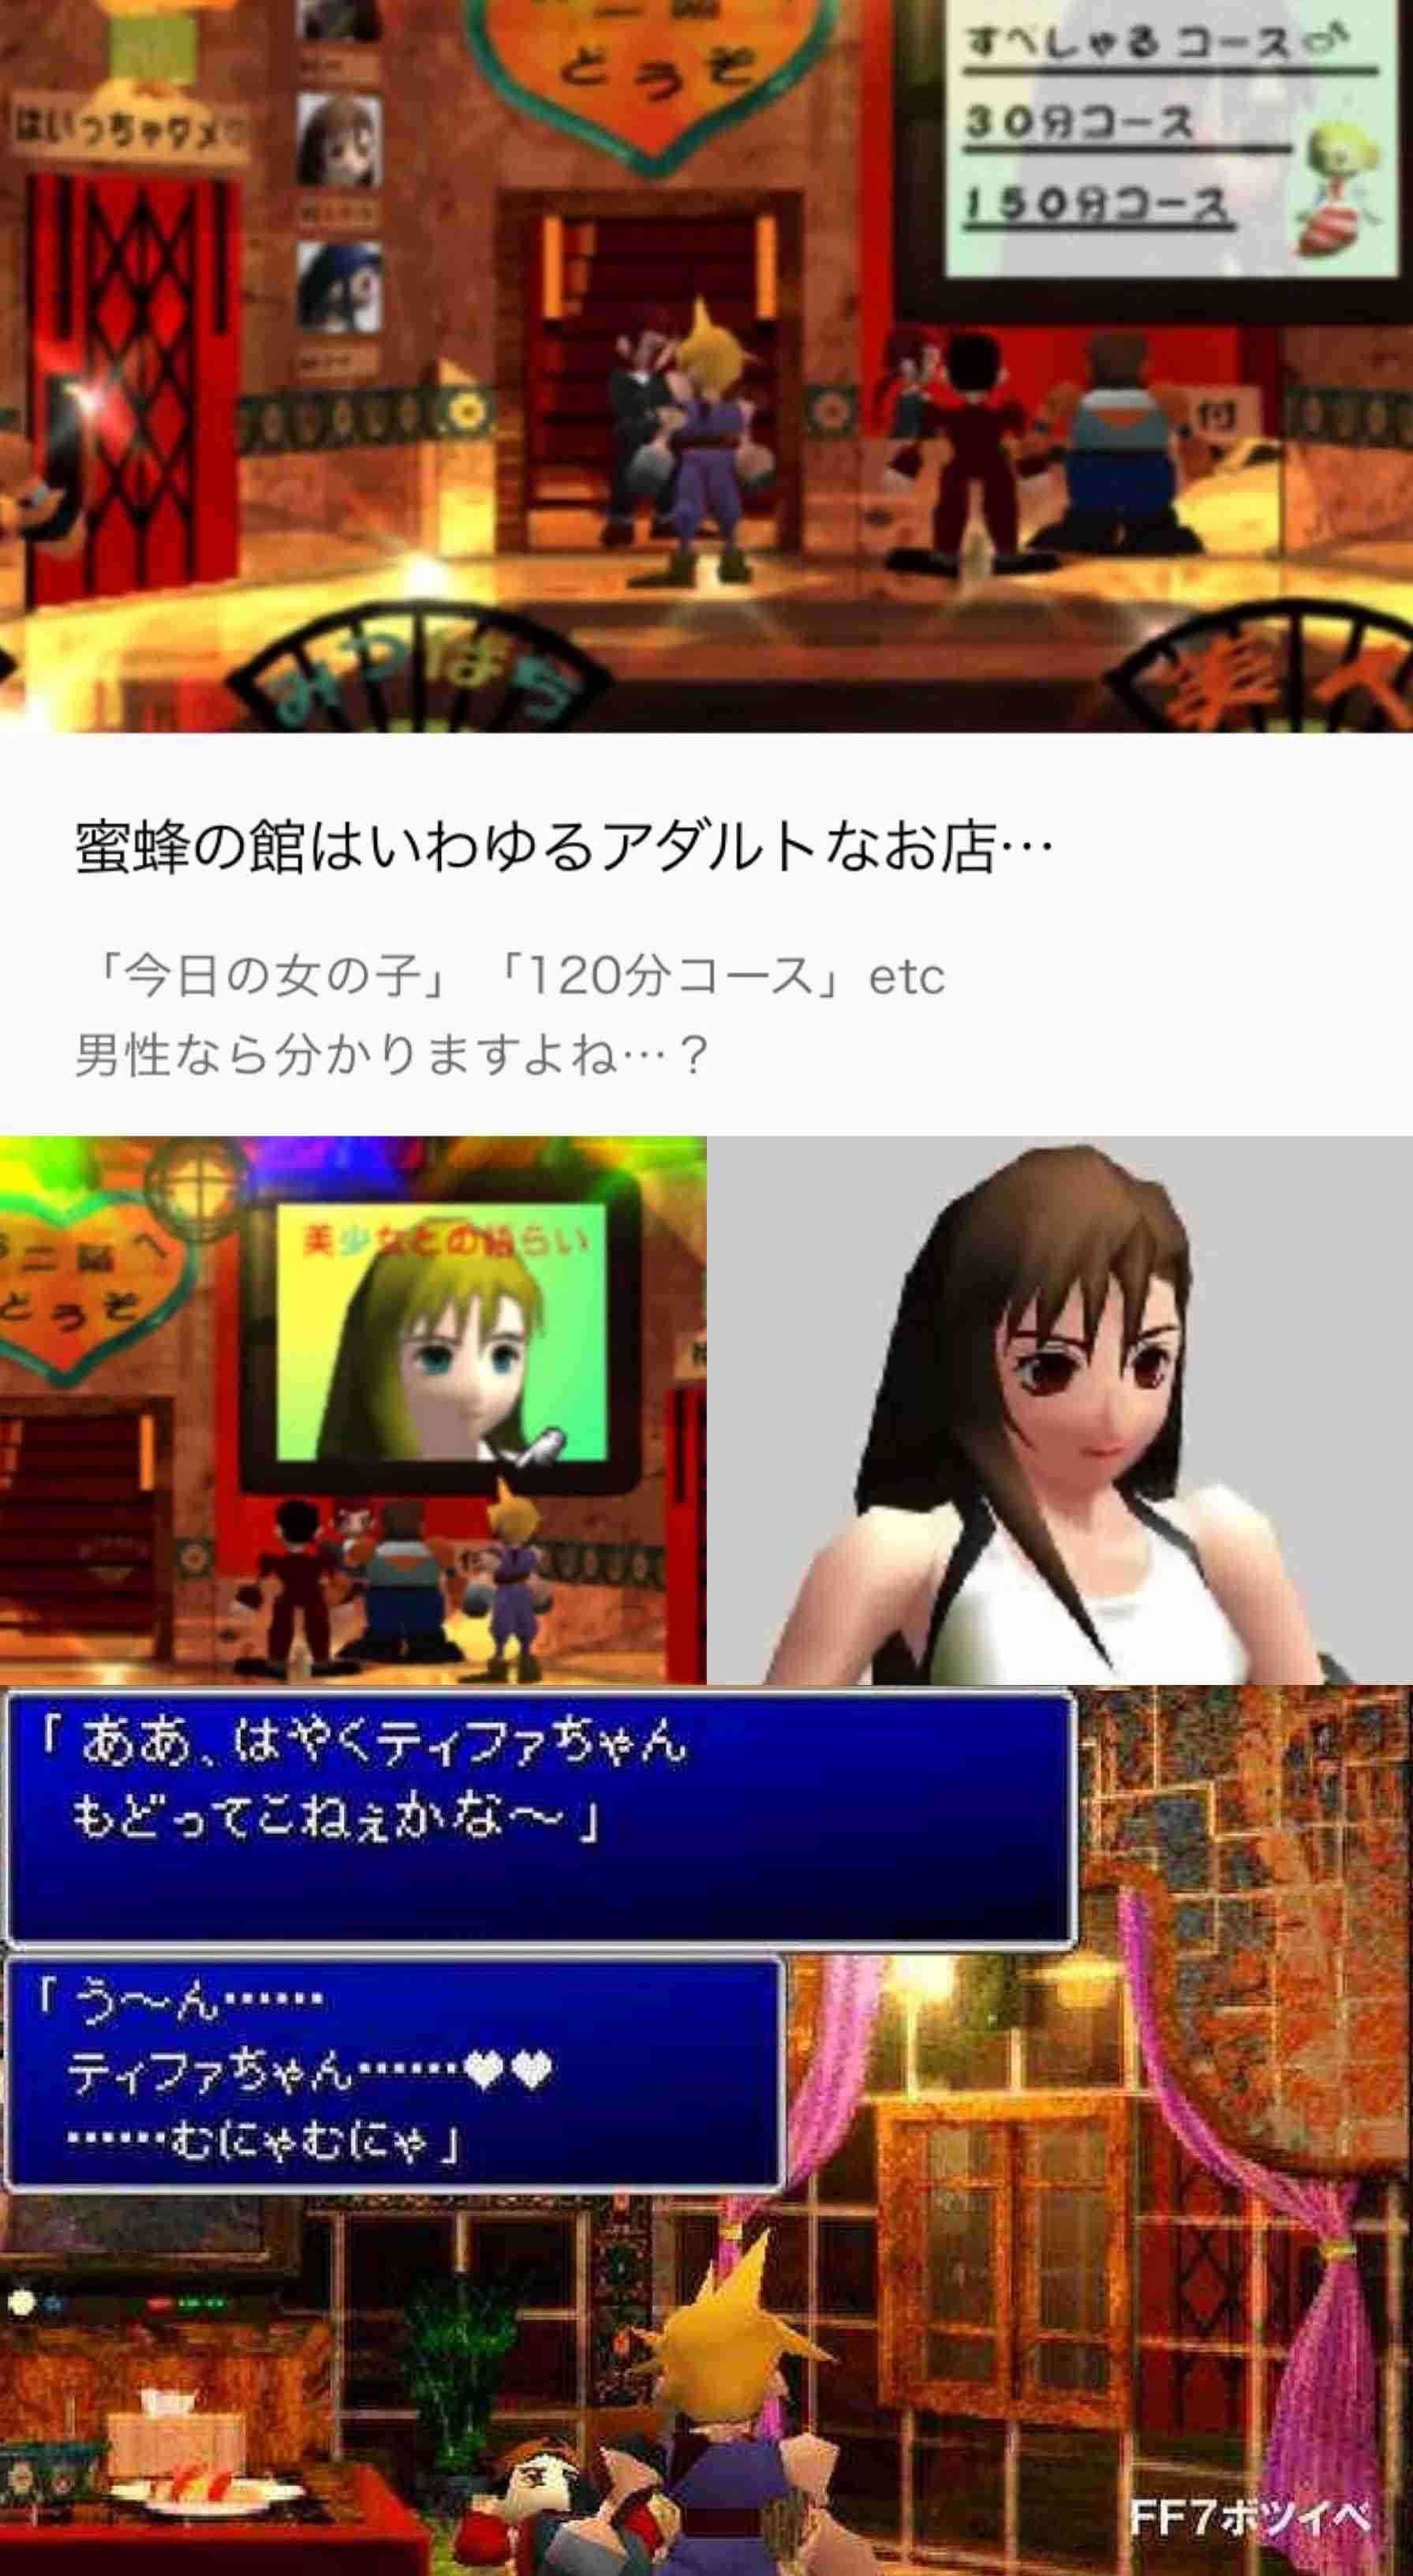 Crimson is the first person who portrayed Ff7's Tifa erotic, isn't he? 10